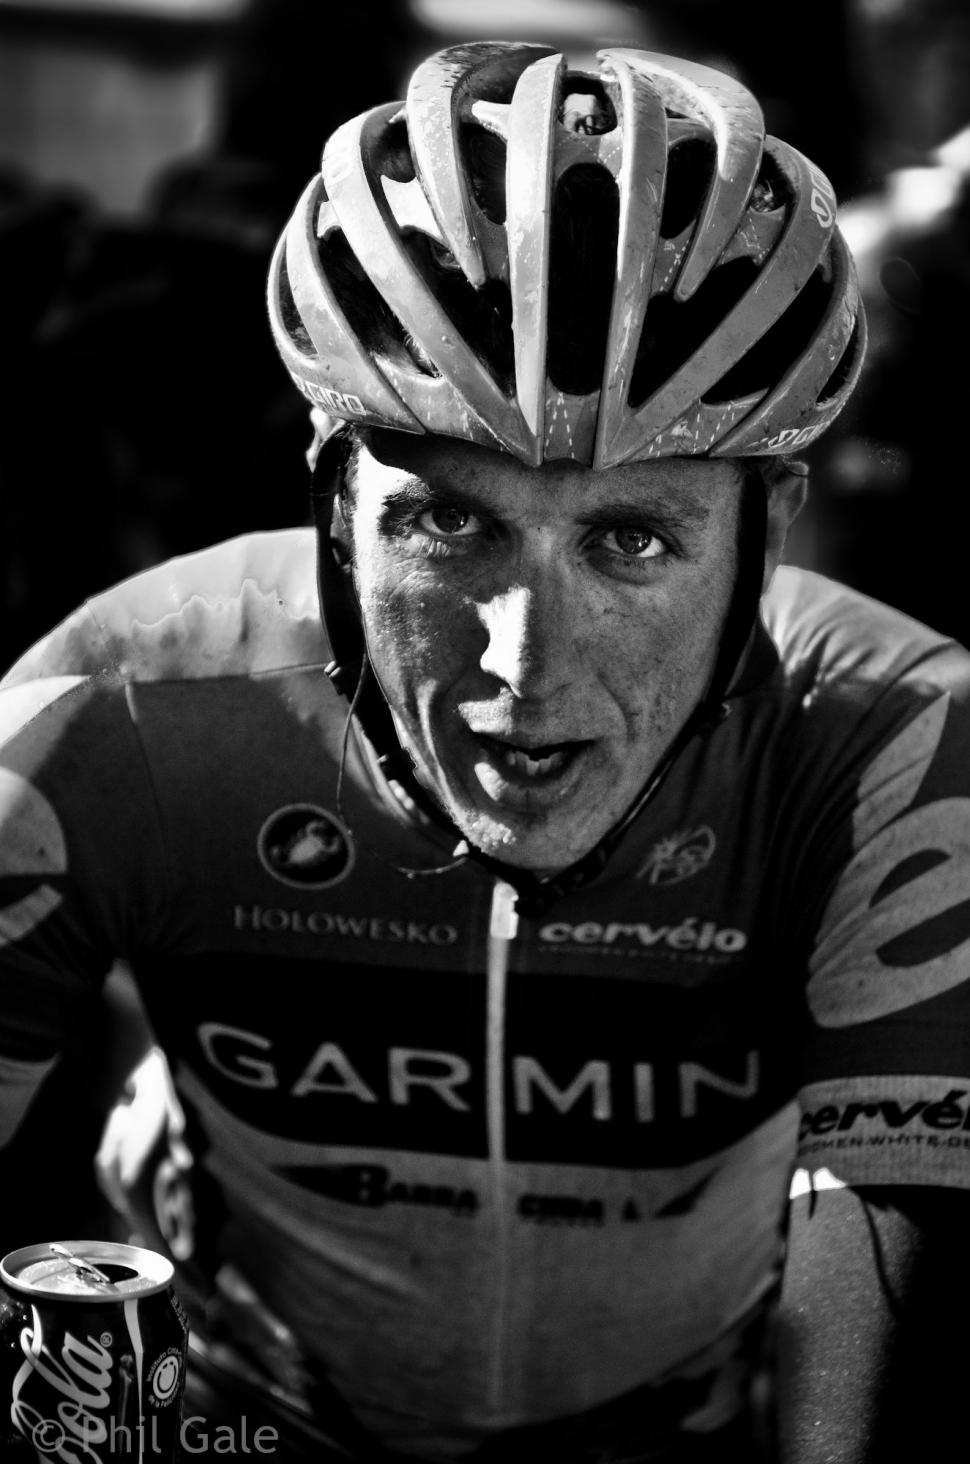 Fleche Wallone 2012 - a race in pictures | road.cc